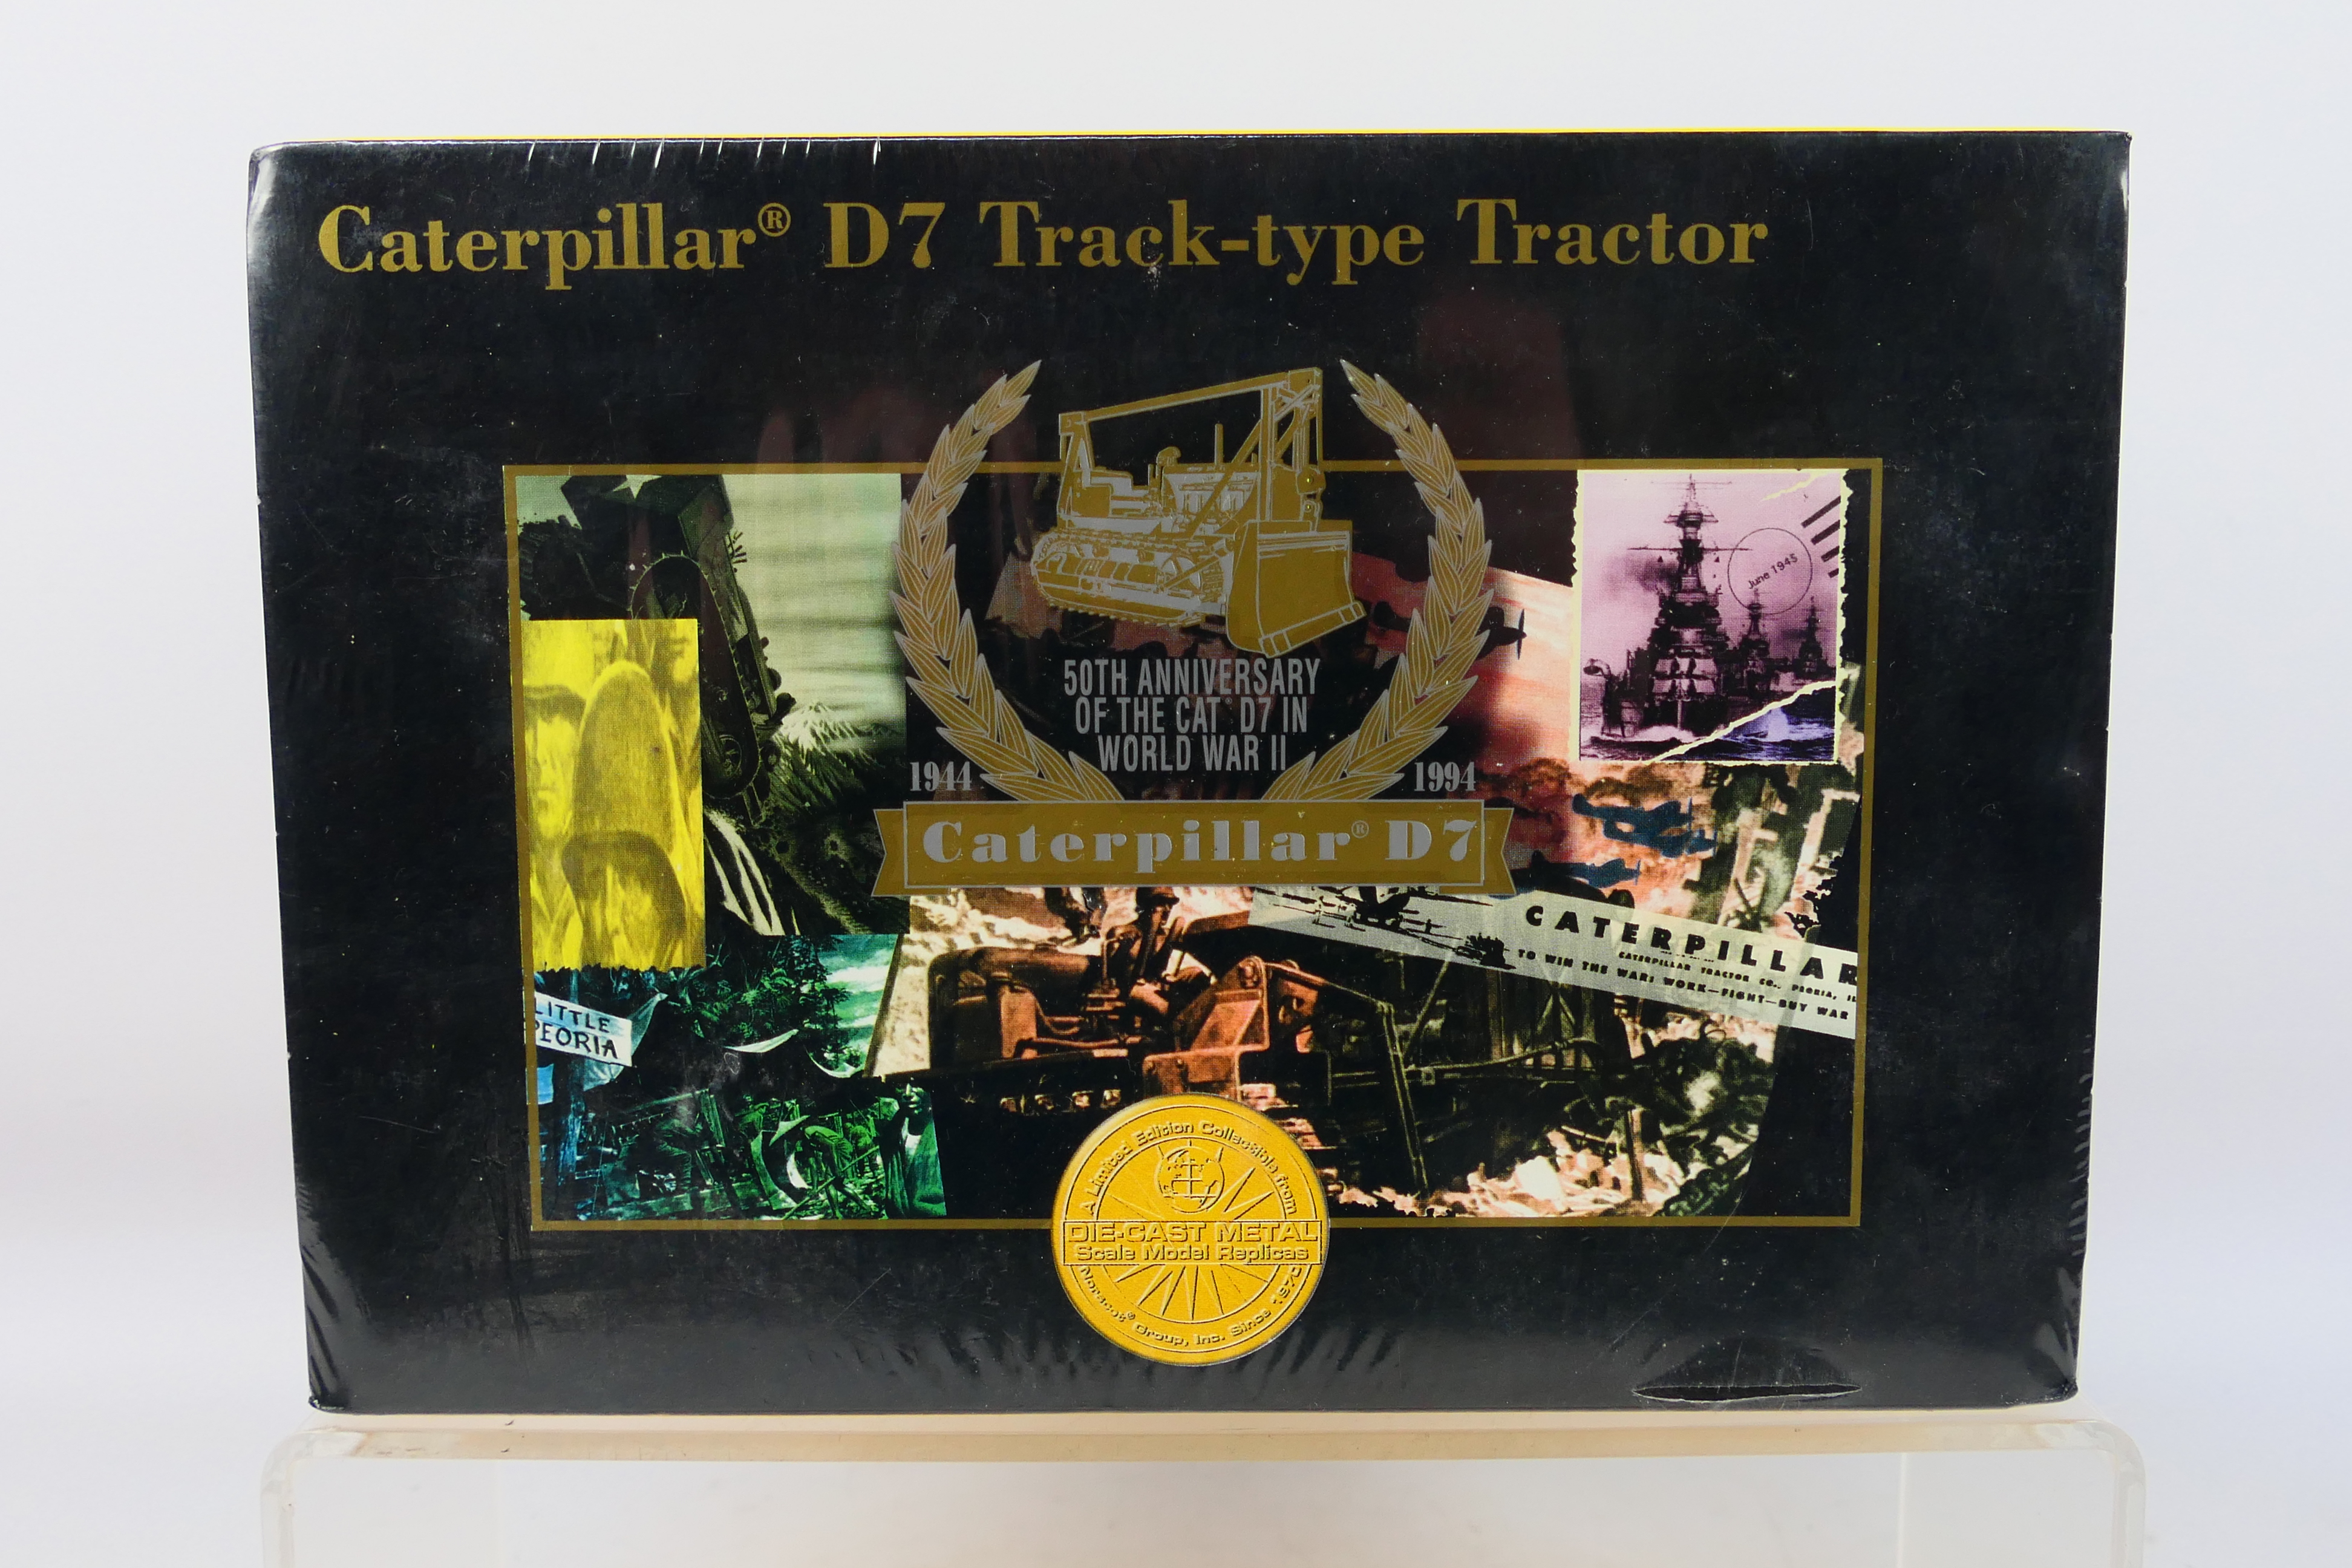 Norscot NZG - A factory sealed limited edition 1:25 scale Caterpillar D7 Track-type tractor # 386. - Image 2 of 4